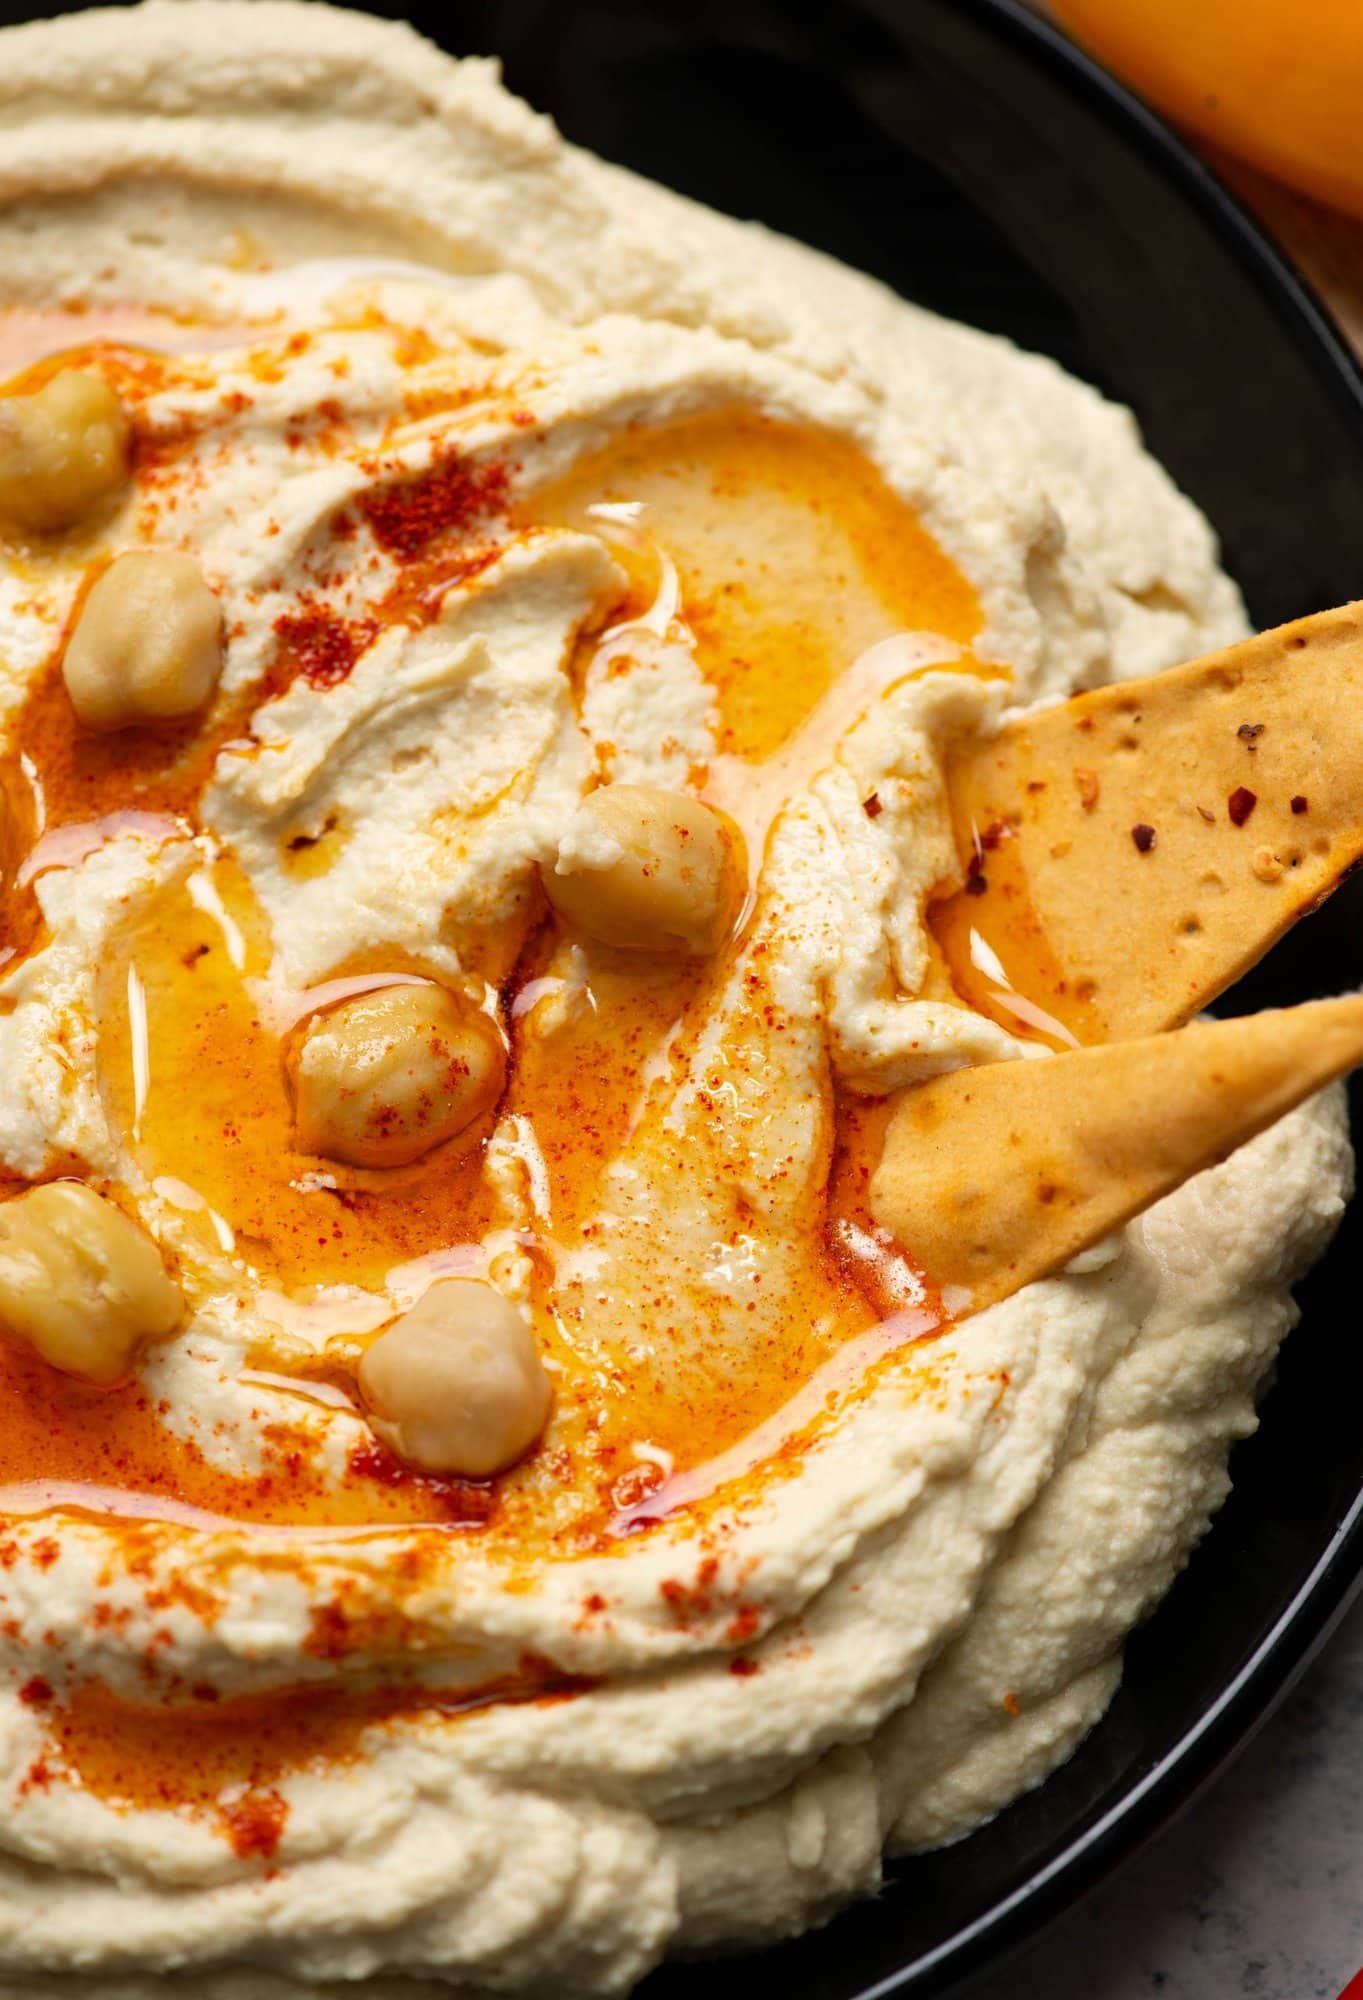 Close view of creamy hummus showing a little olive oil, few whole chickpeas as garnish with pita bites.